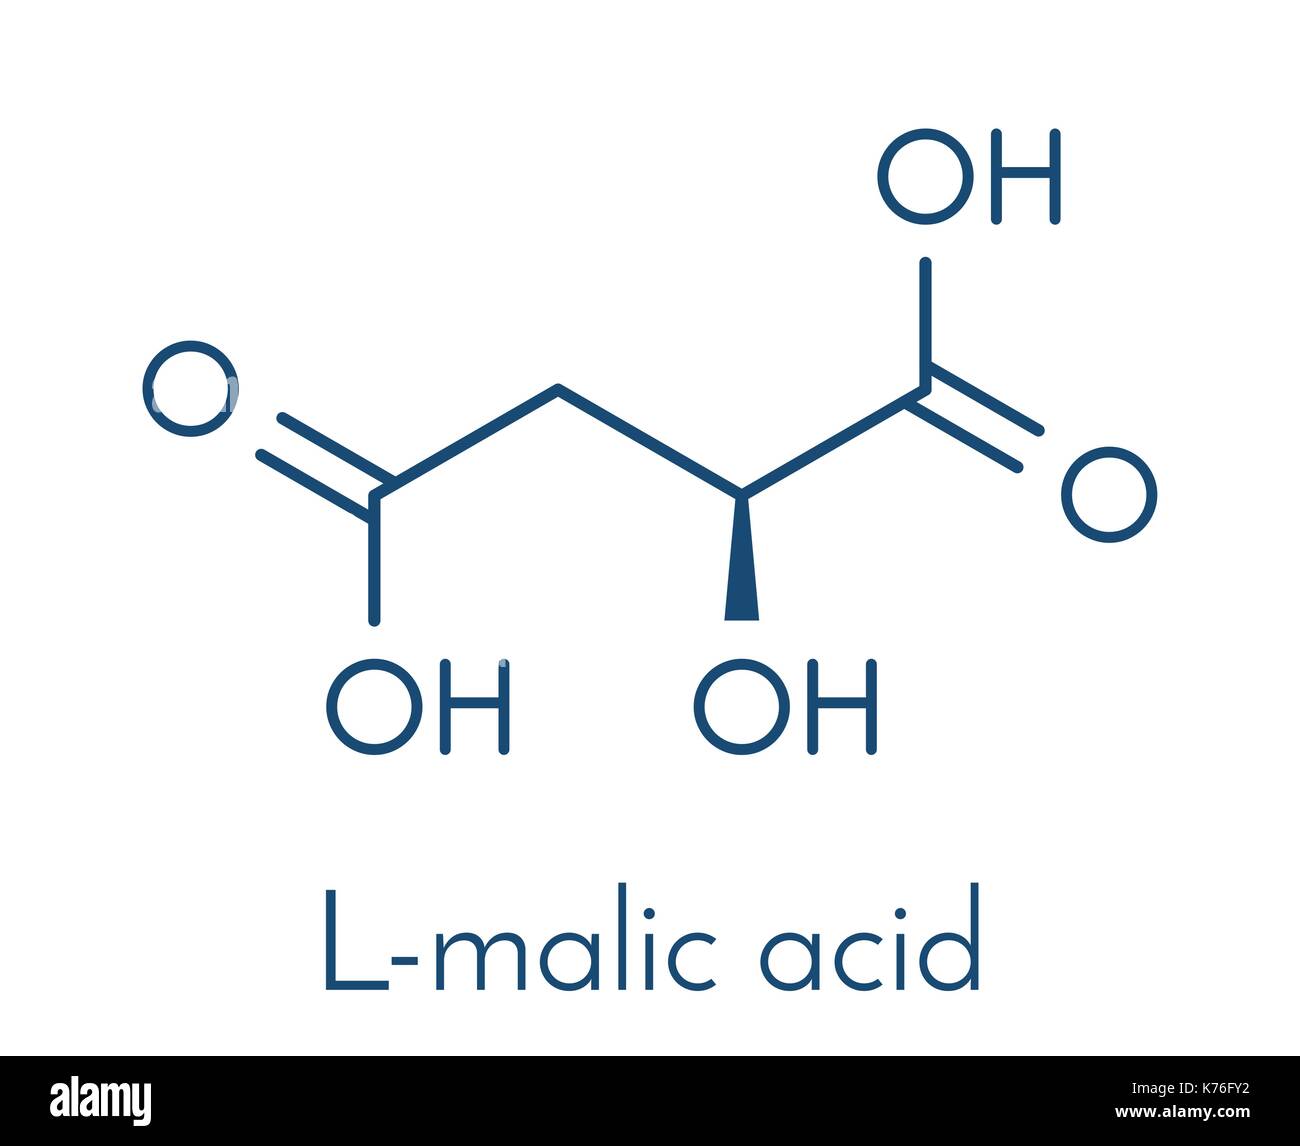 Malic acid fruit acid molecule. Present in apples, grapes, rhubarb, etc and contributes to the sour taste of these. Skeletal formula. Stock Vector